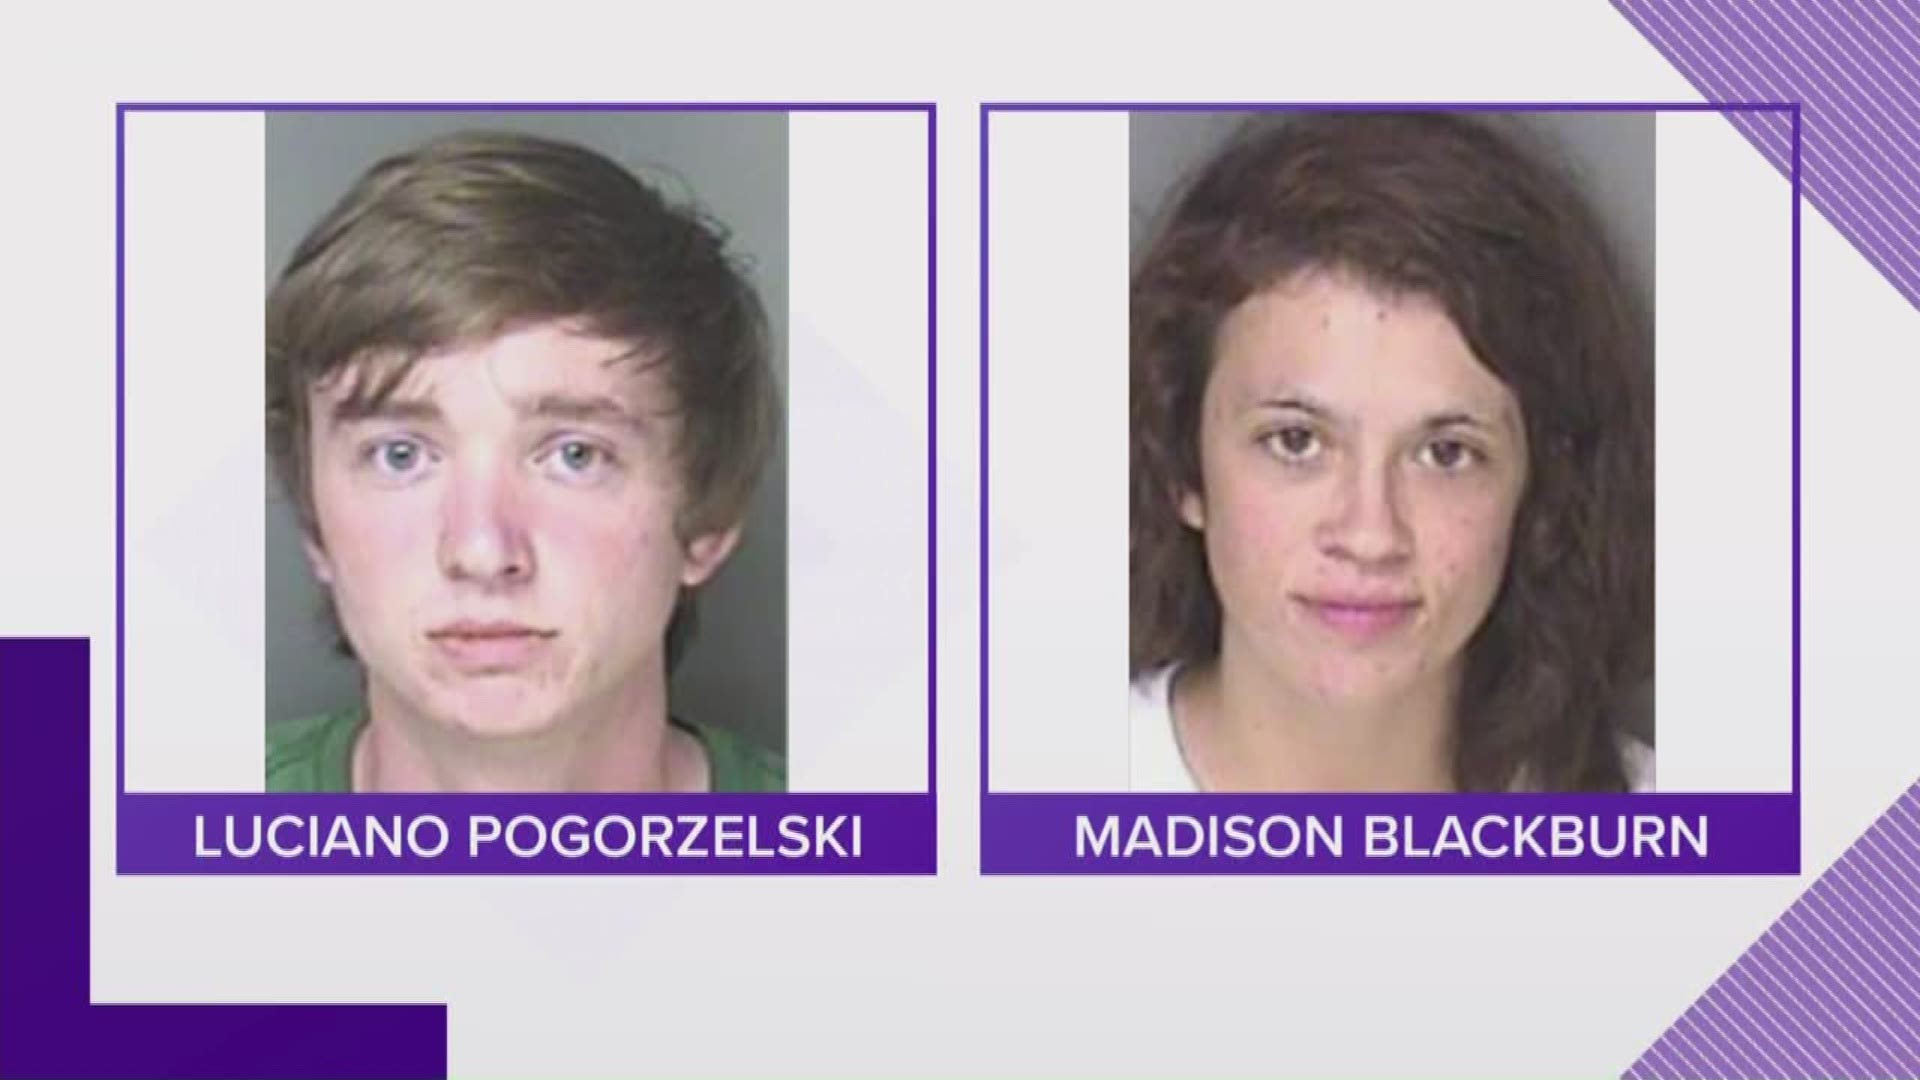 Luciano Pogorzelske and Madison Blackburn were discovered at a gas station in Gastonia. This was after a cross-country manhunt in relation to a September 28 murder.